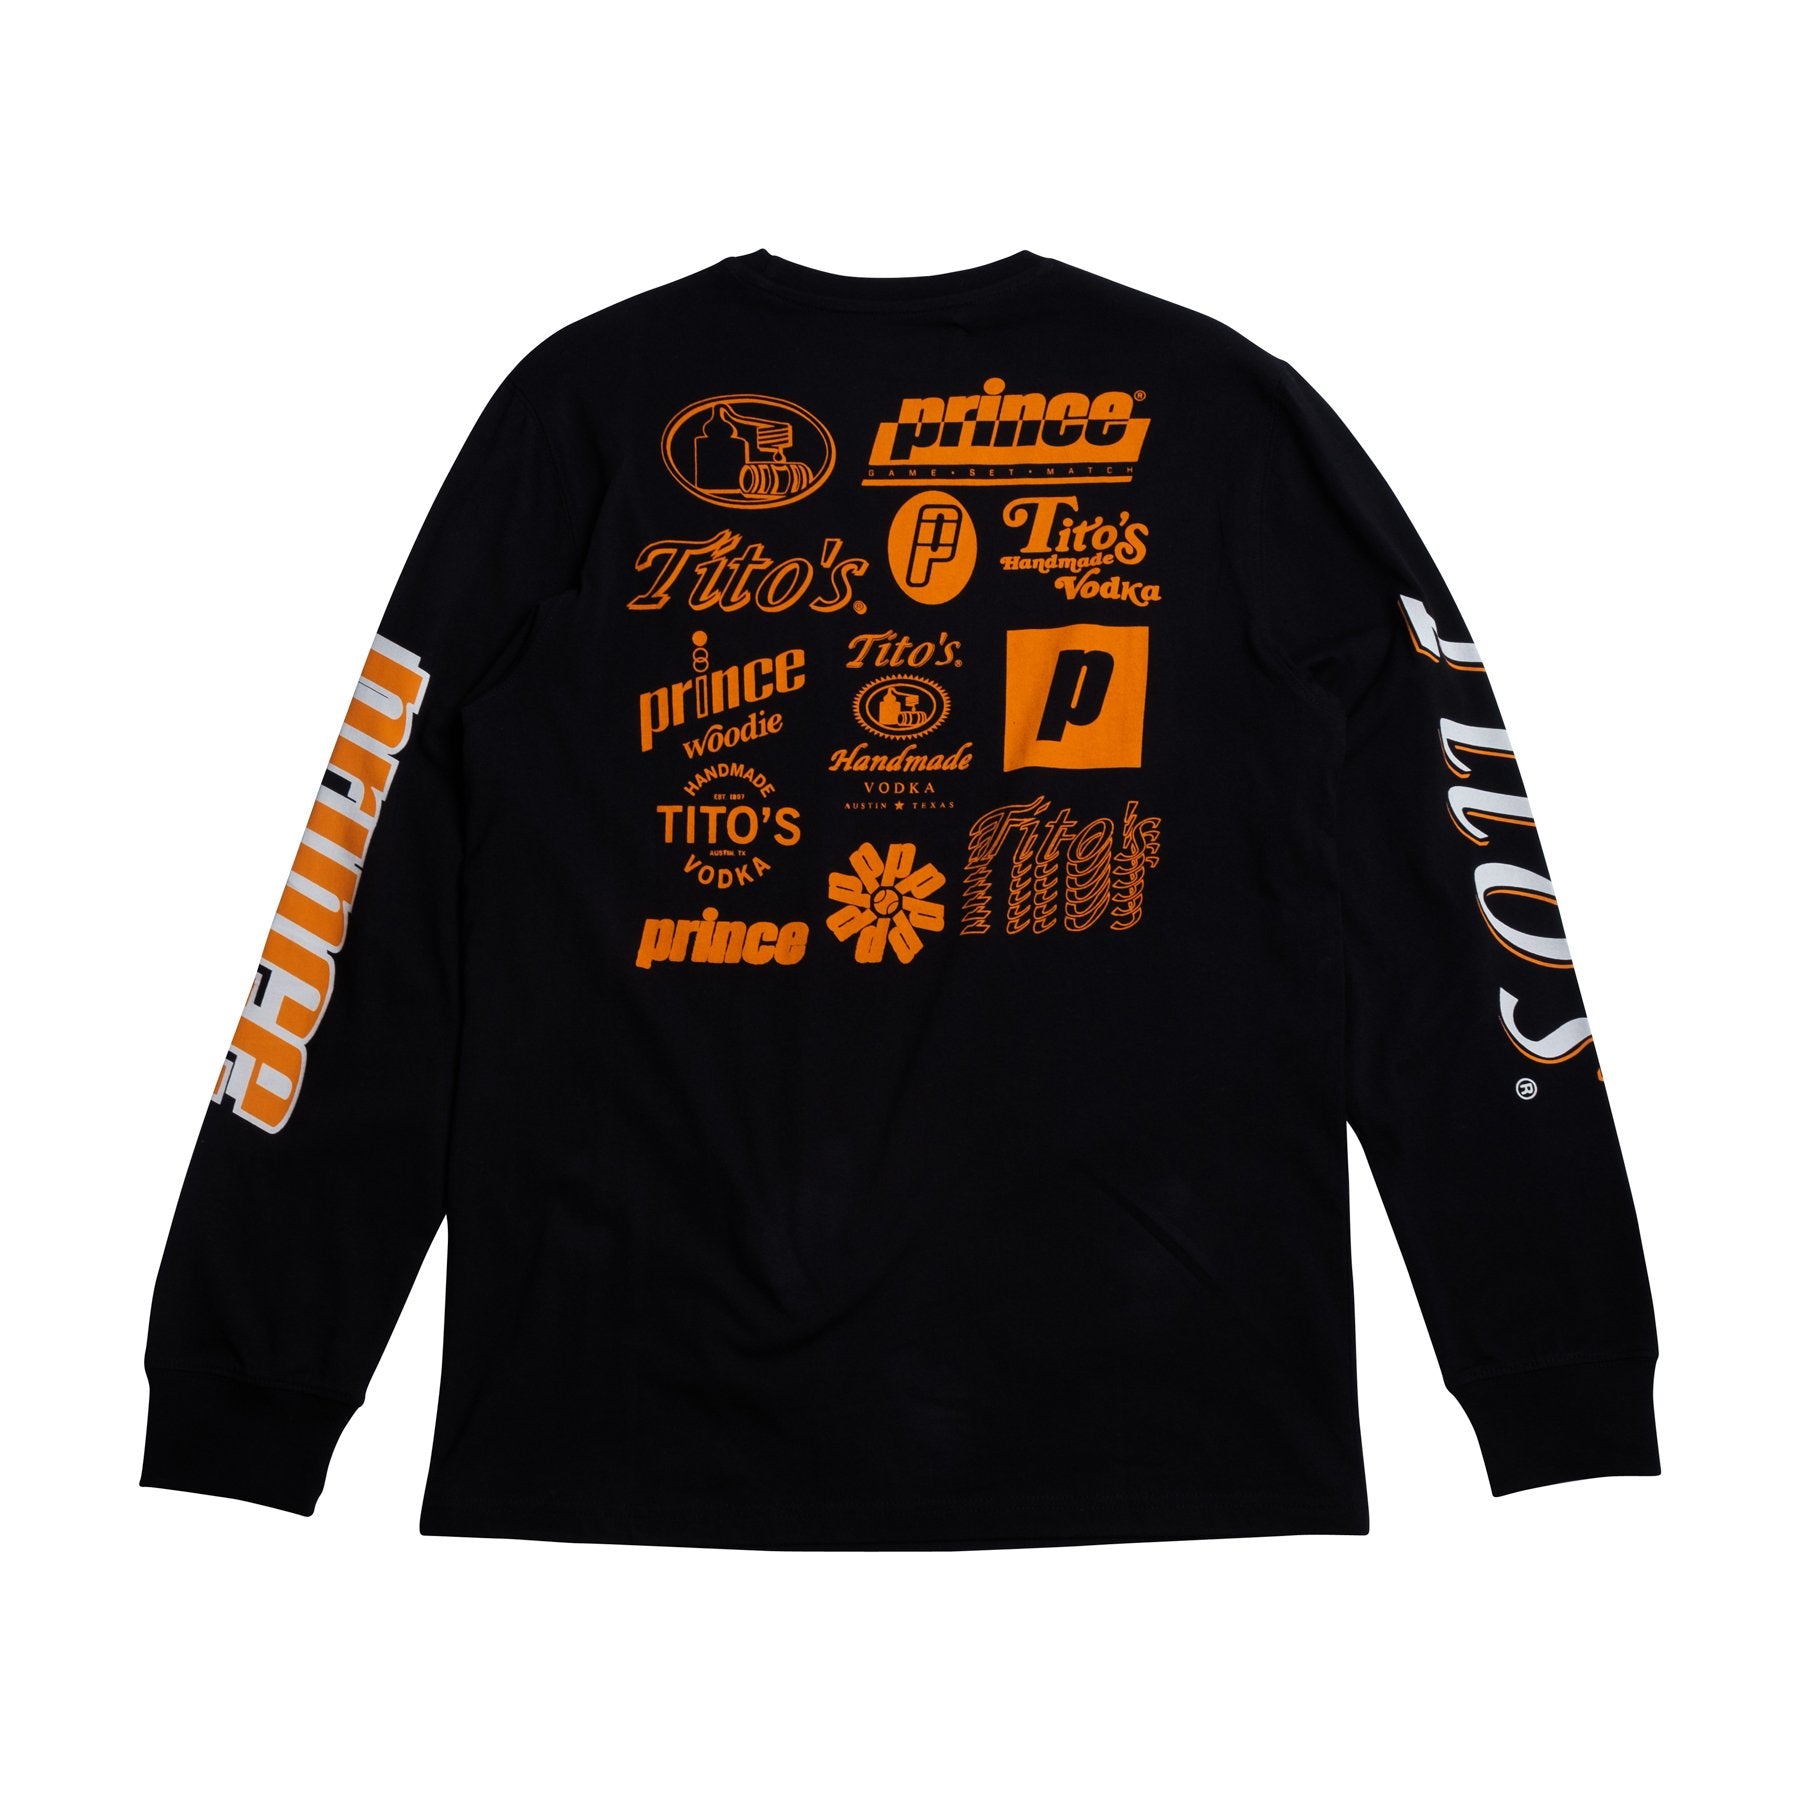 Back of black long sleeve with prince and tito's logos in orange